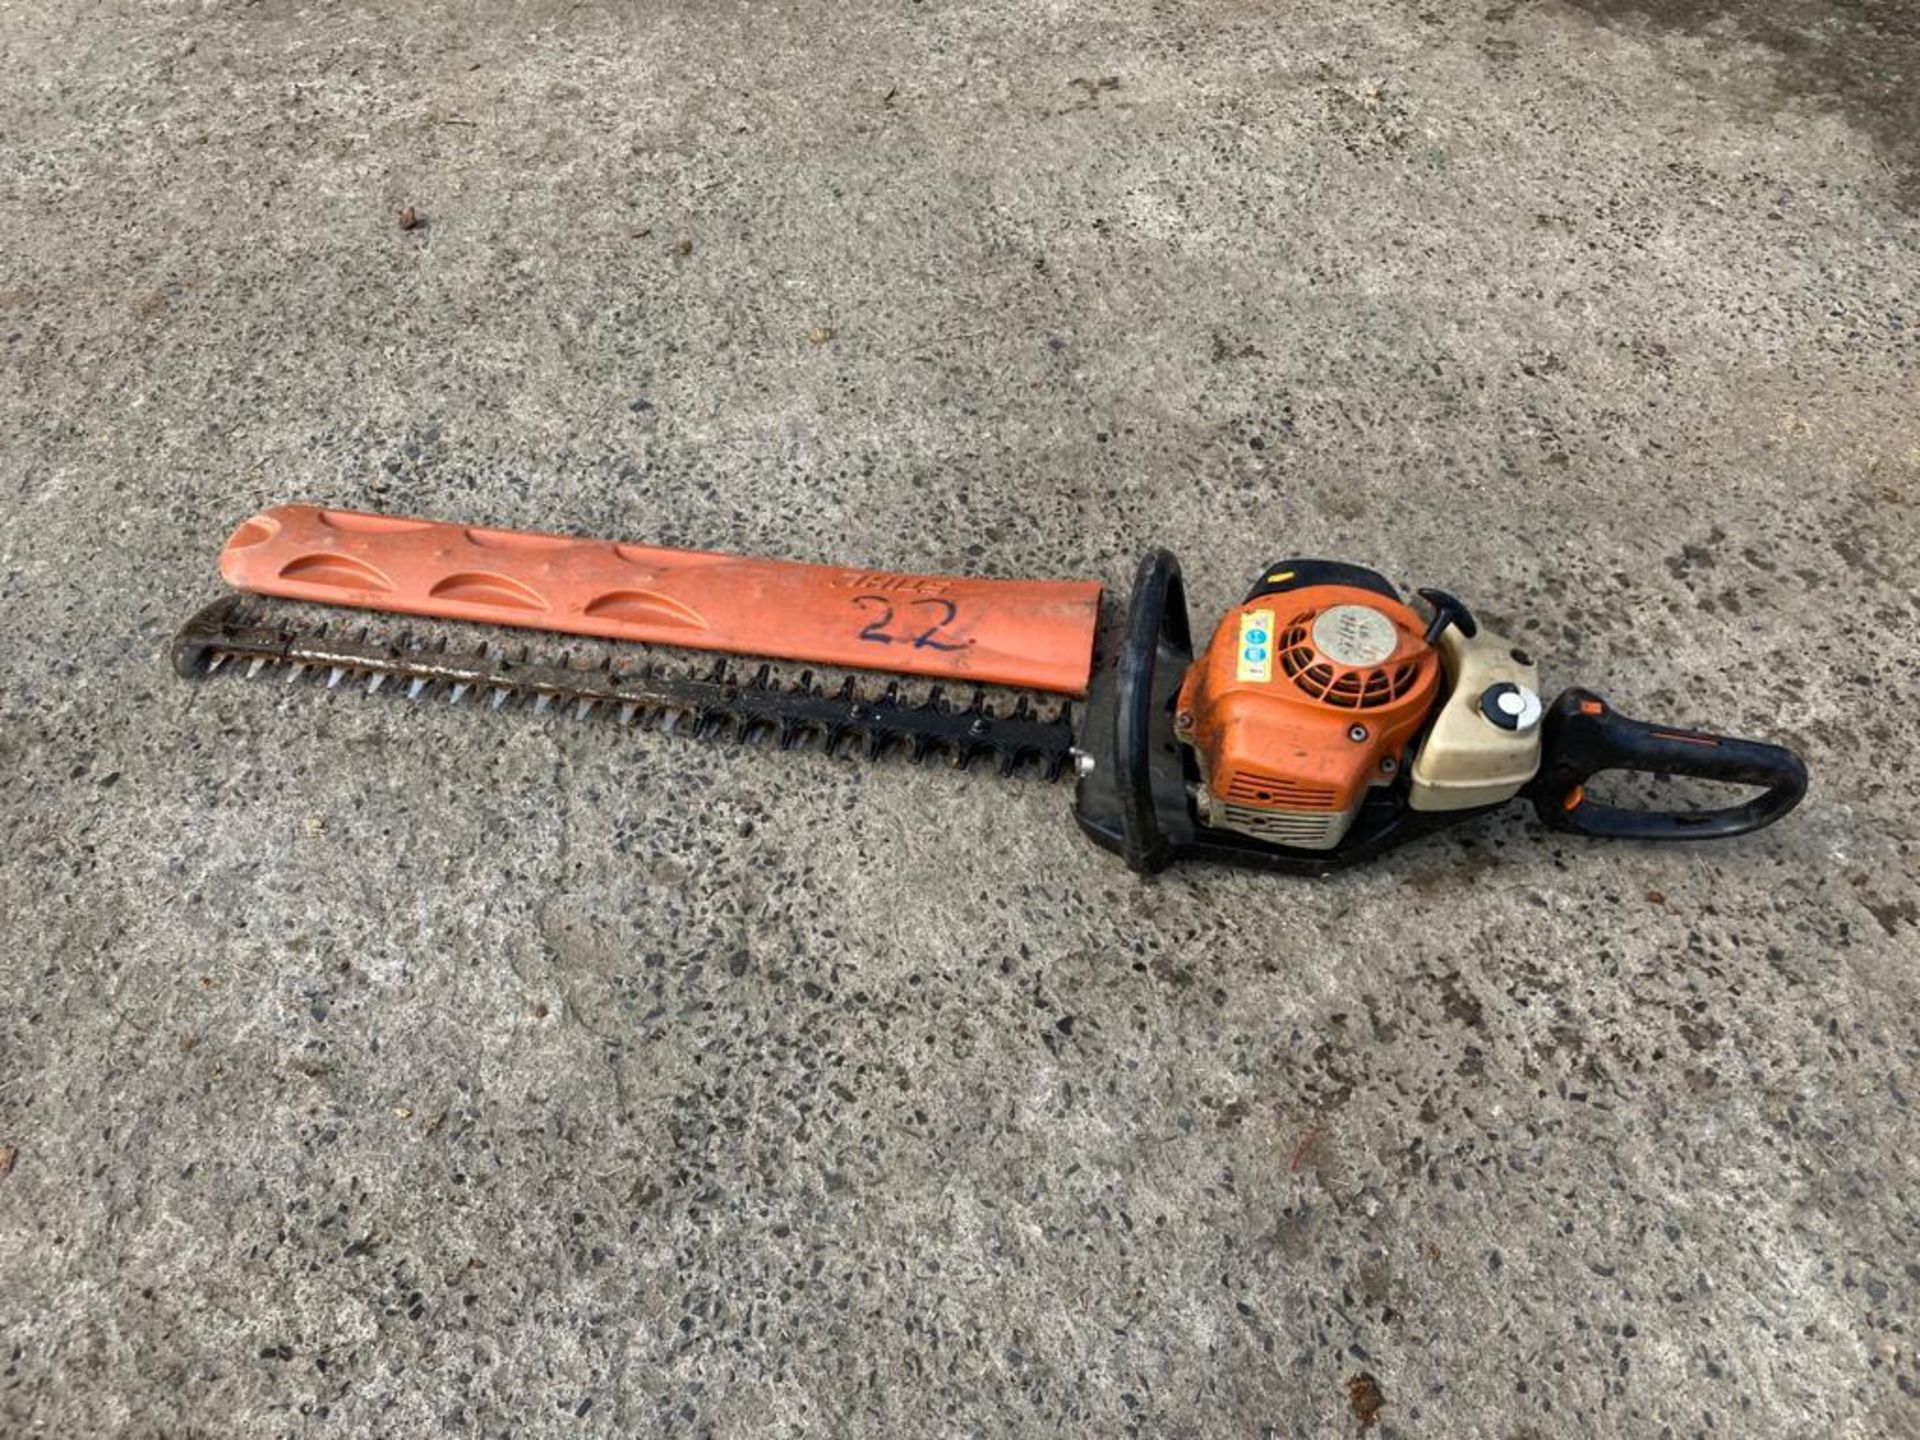 STIHL COMMERCIAL HEDGE TRIMMER LOCATED IN NORTHERN IRELAND.